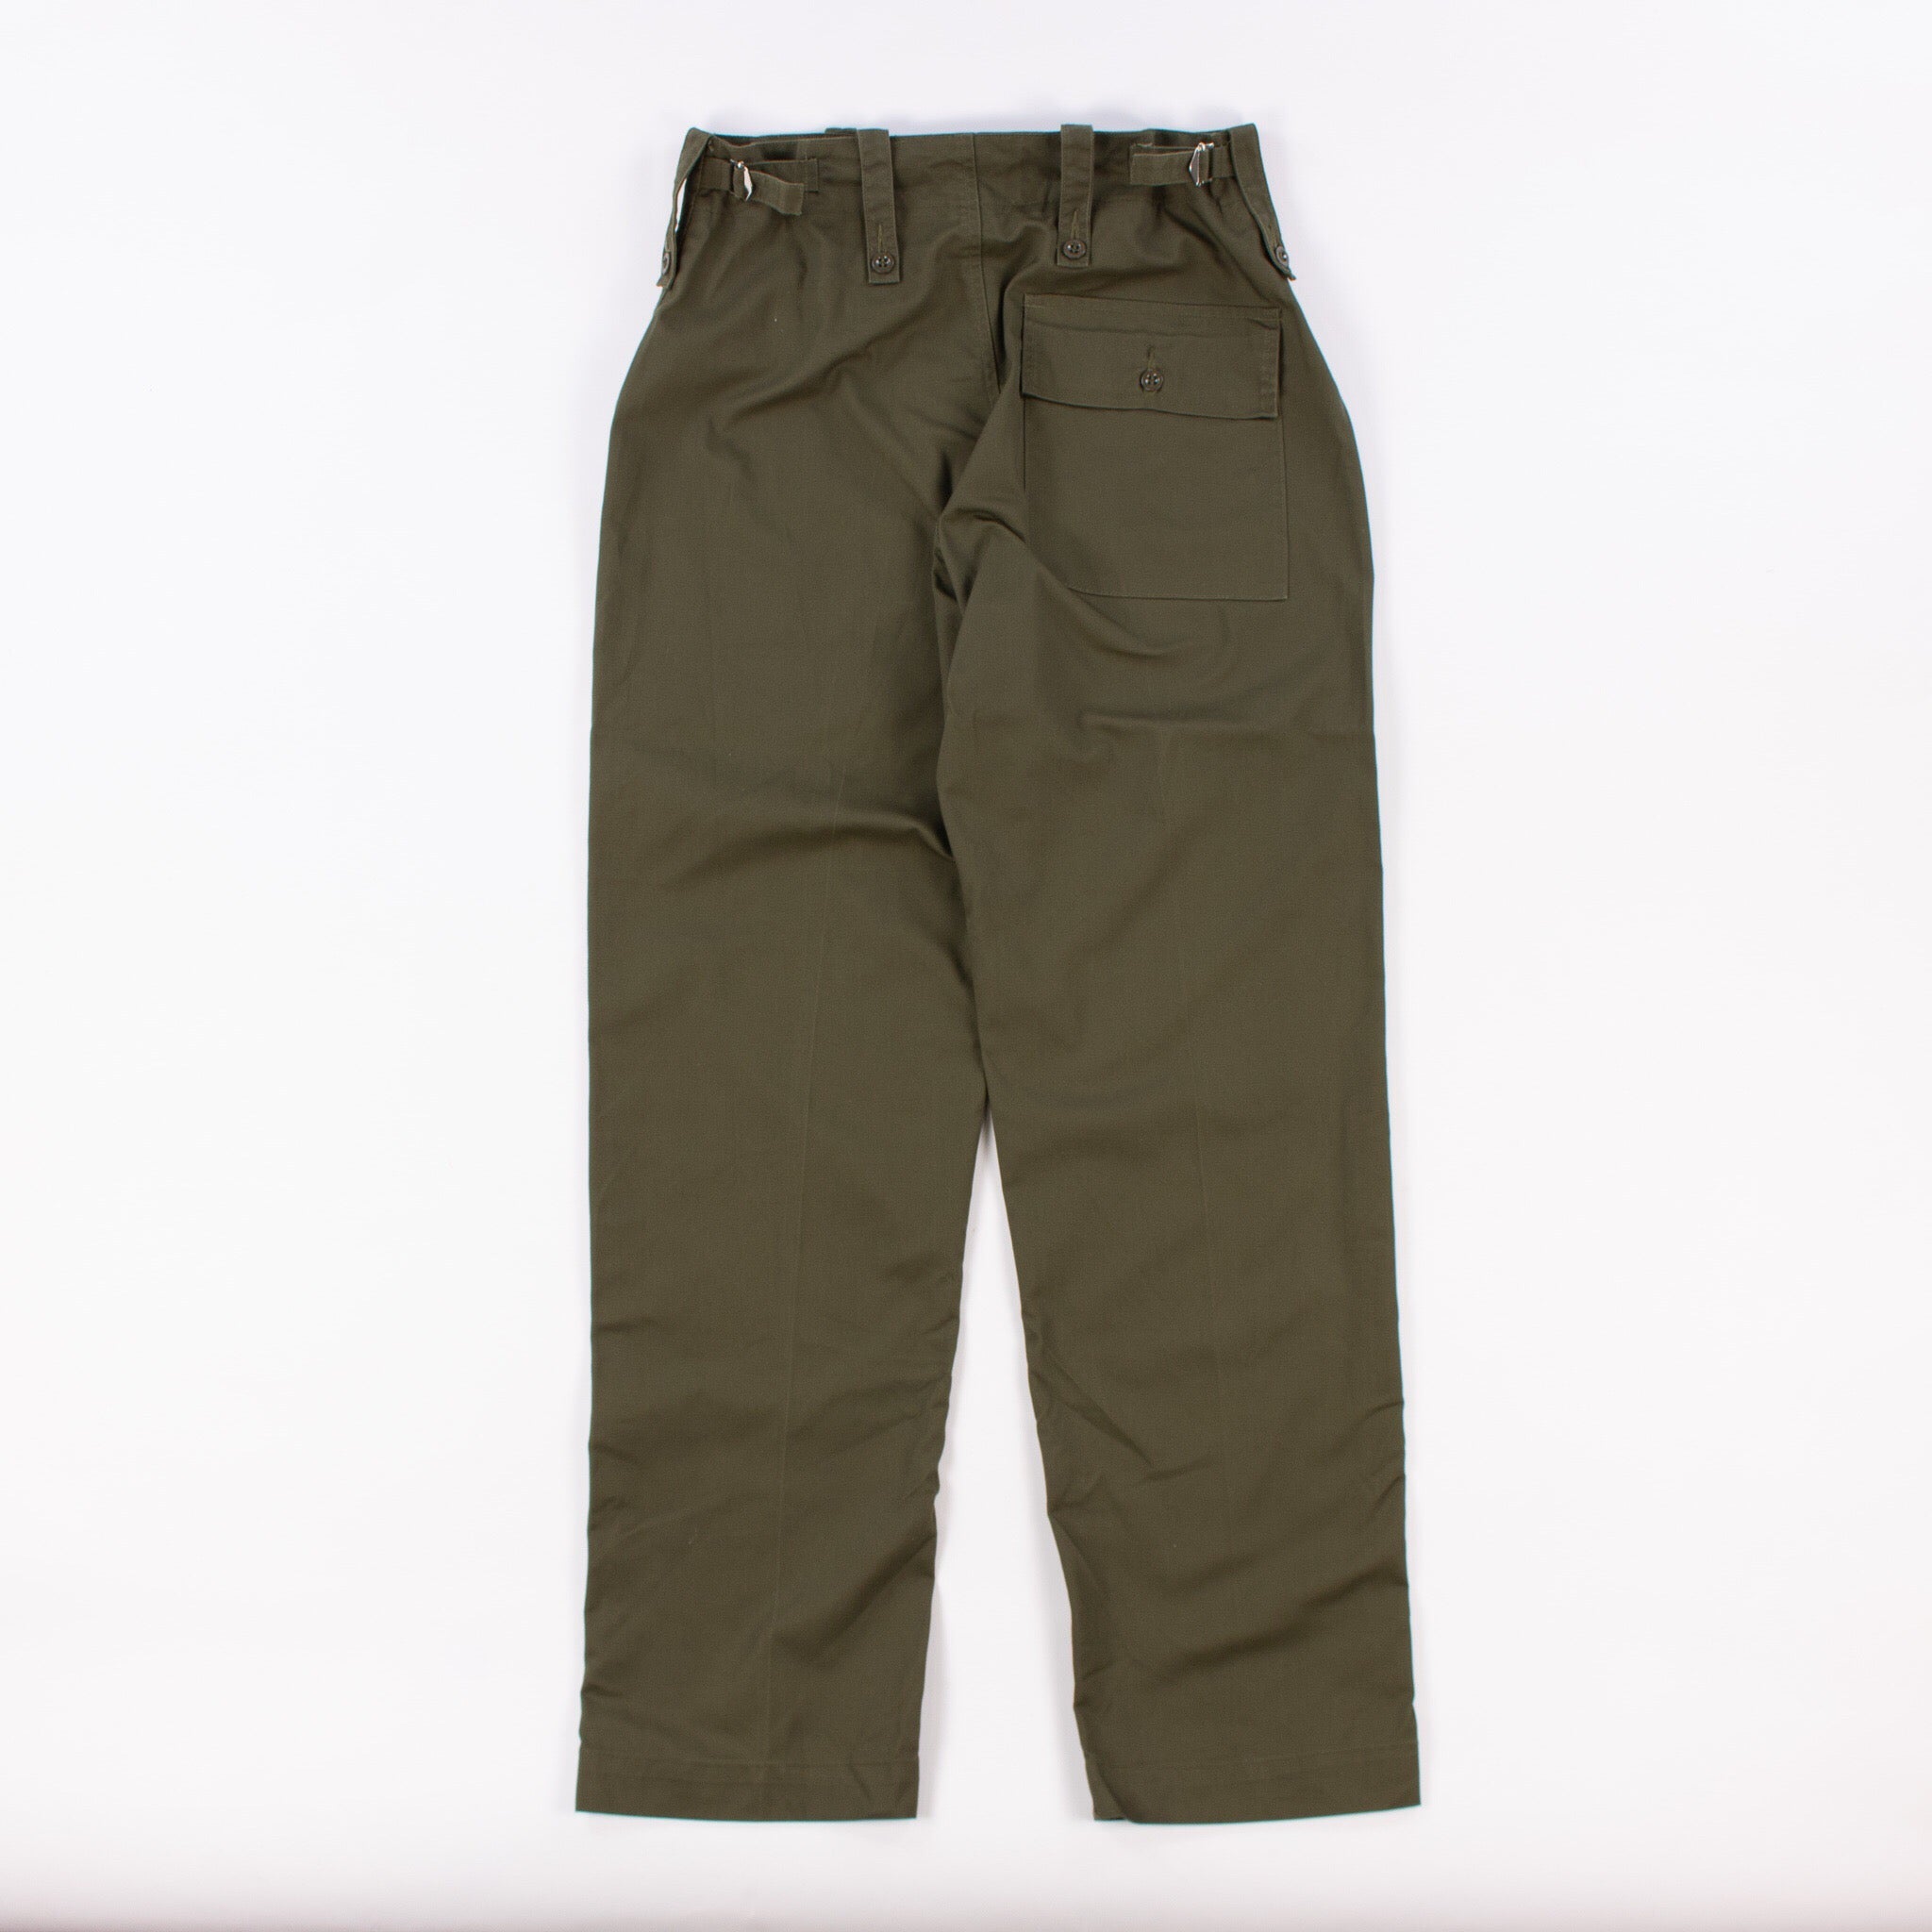 Vintage British Army Olive Green Fatigue Trousers 1960s-70s | American ...